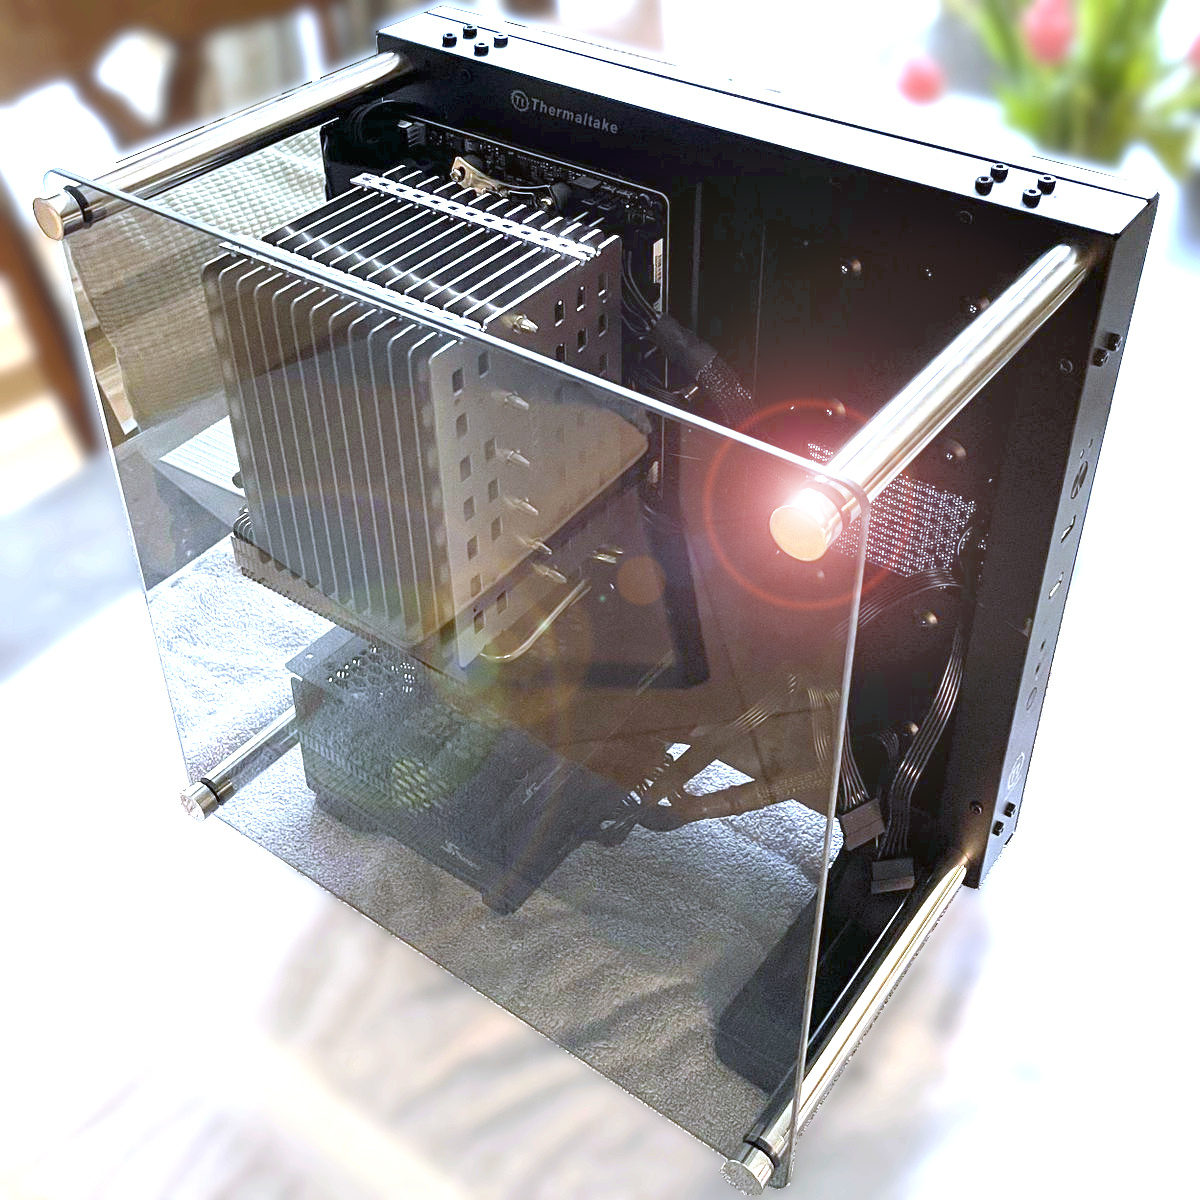 The best case for passive cooling is now $99.99 amazon.com/Thermaltake-Te…